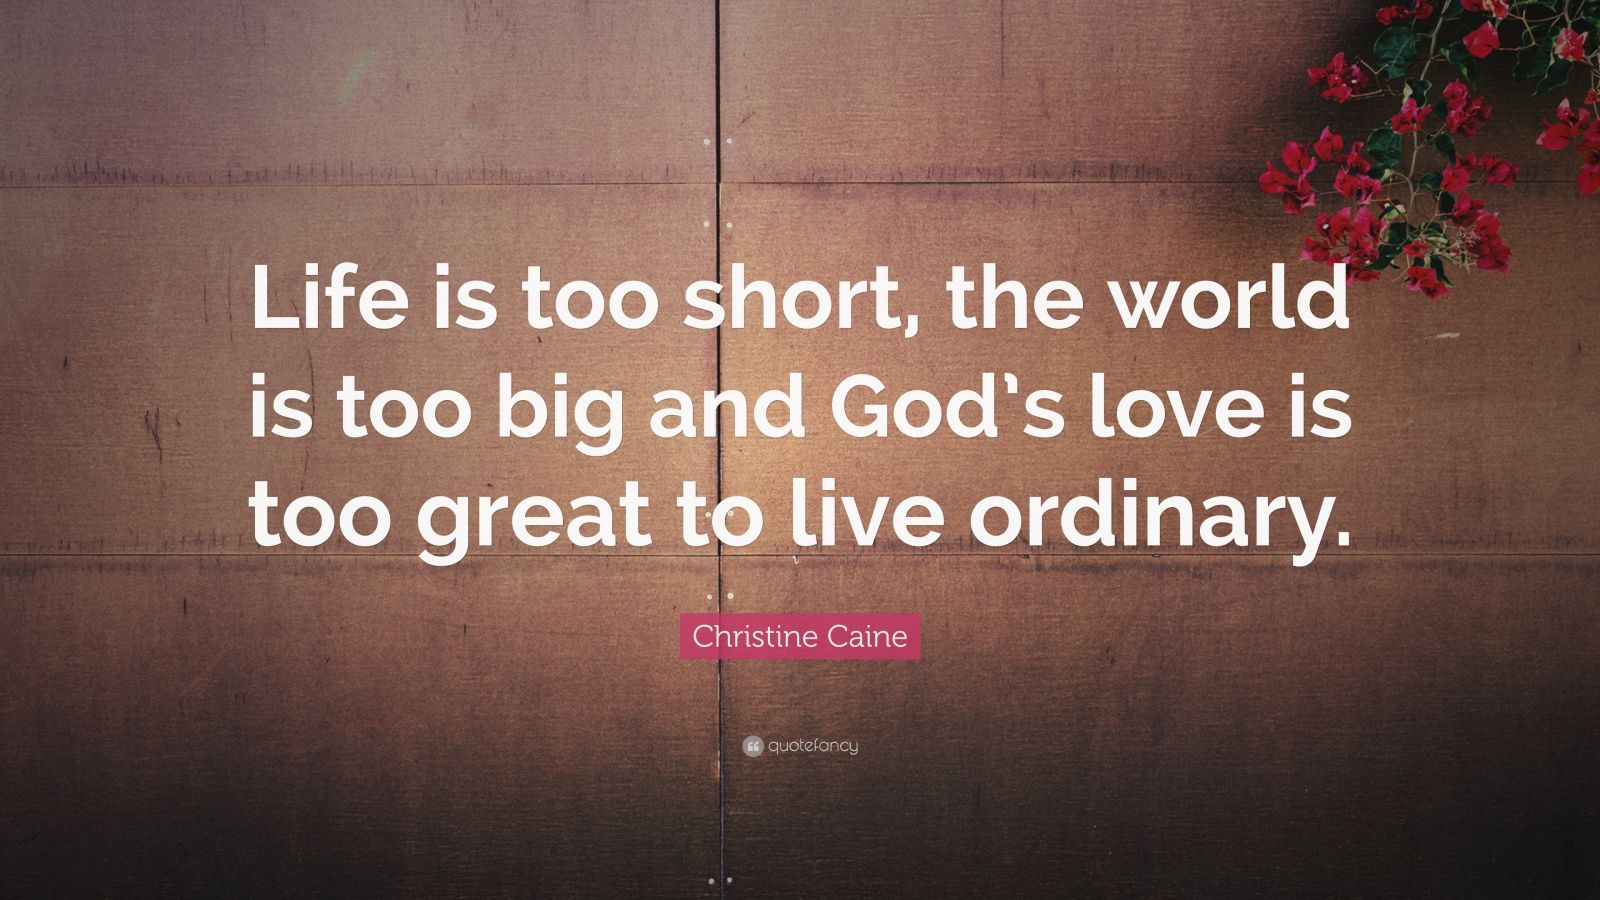 Christine Caine Quote: “Life is too short, the world is too big and God